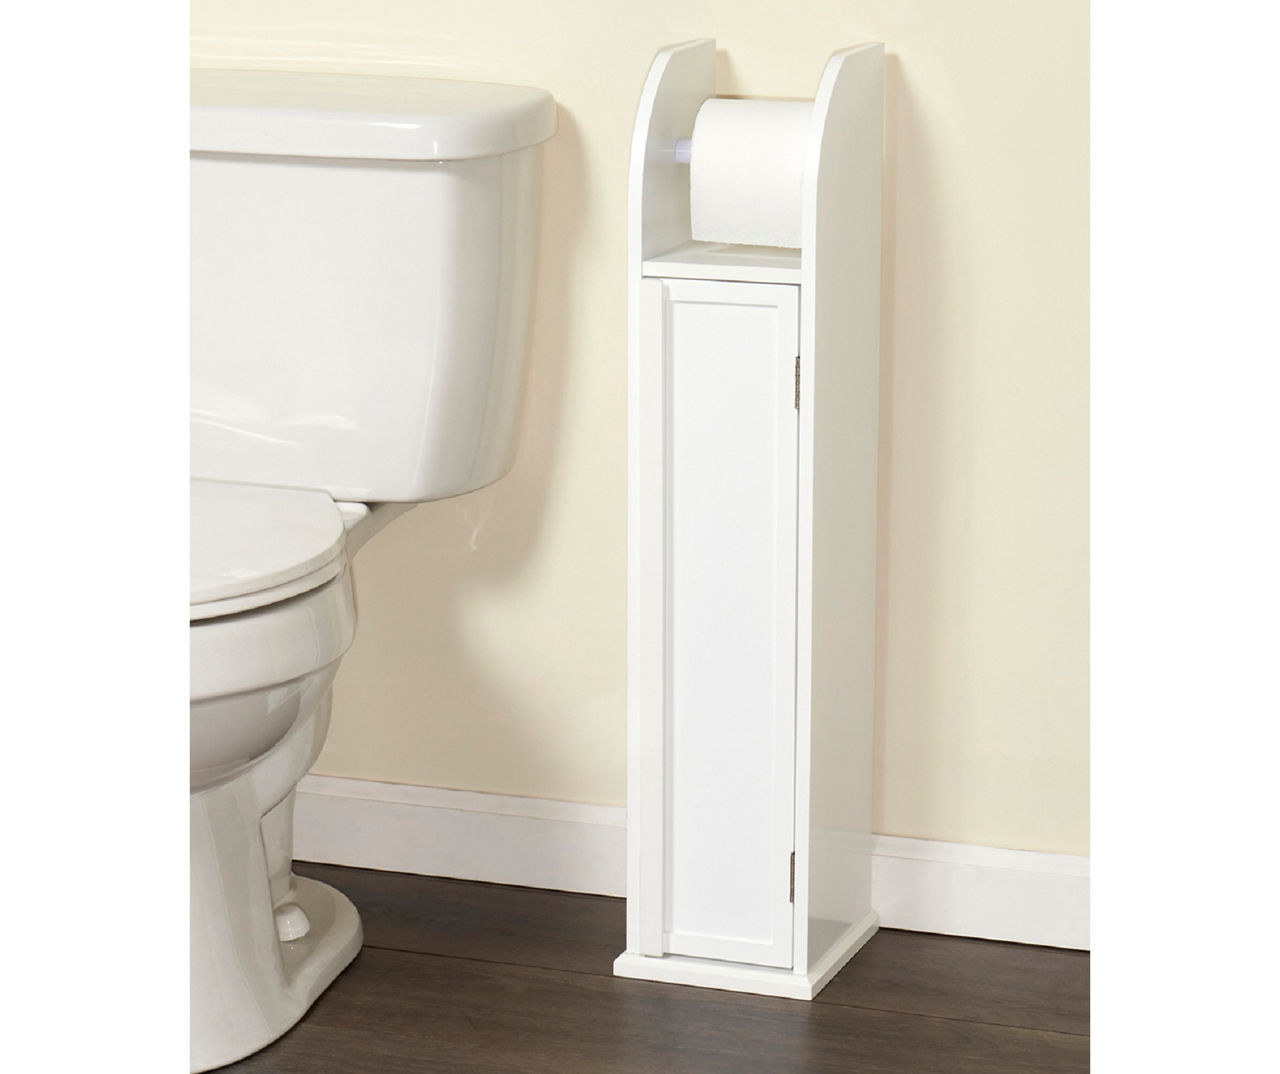 Toilet Paper Holder Stand-Toilet Paper Holder Behind Toilet  Storage,Bathroom Stand with Toilet Paper Holder Insert,Slim Storage Cabinet  for Small